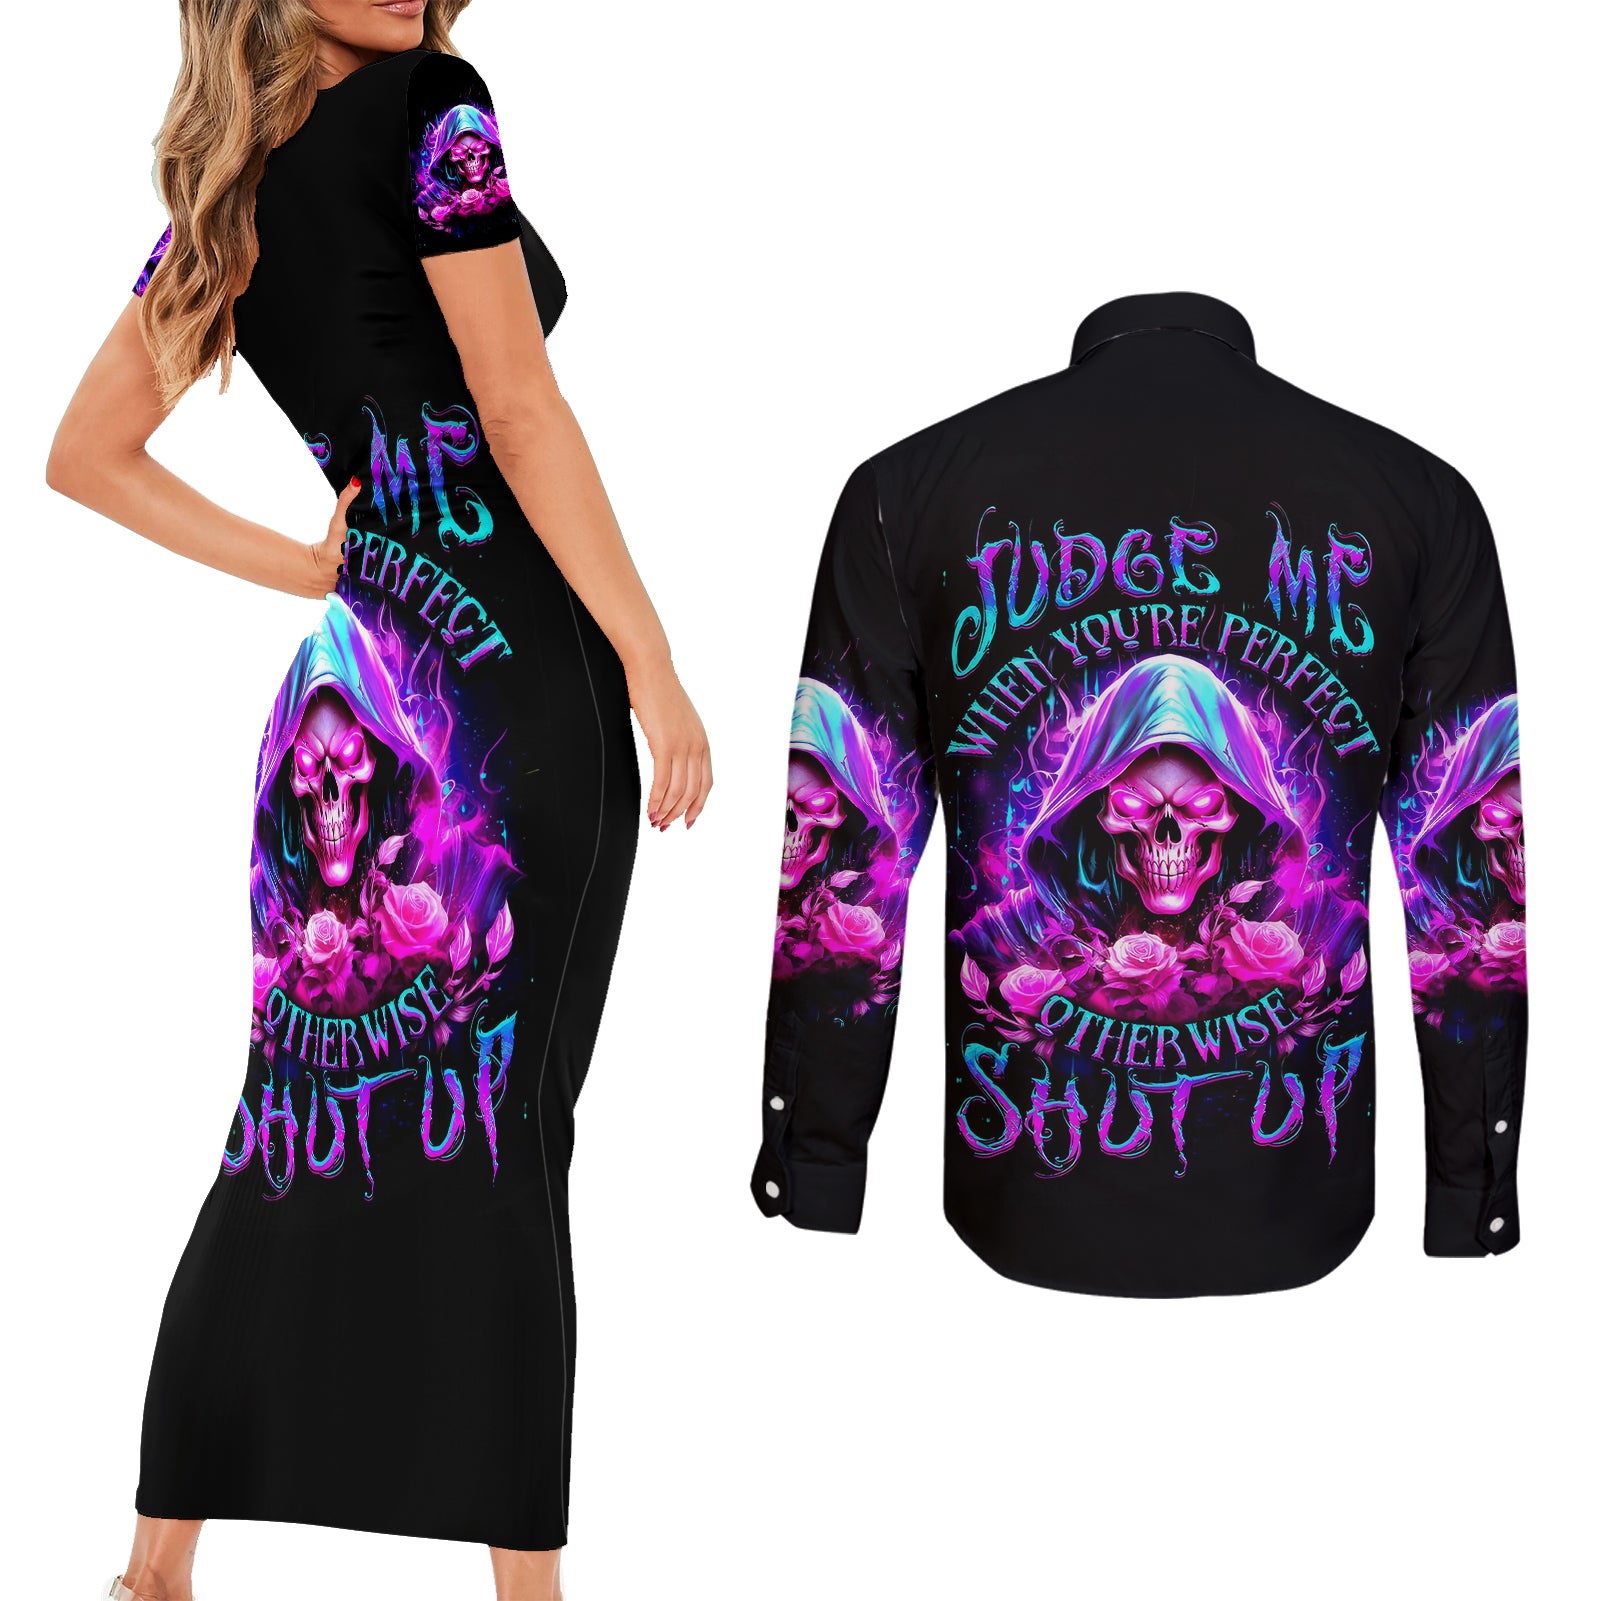 fire-skull-couples-matching-short-sleeve-bodycon-dress-and-long-sleeve-button-shirts-judge-me-when-youre-perfect-otherwise-shut-up